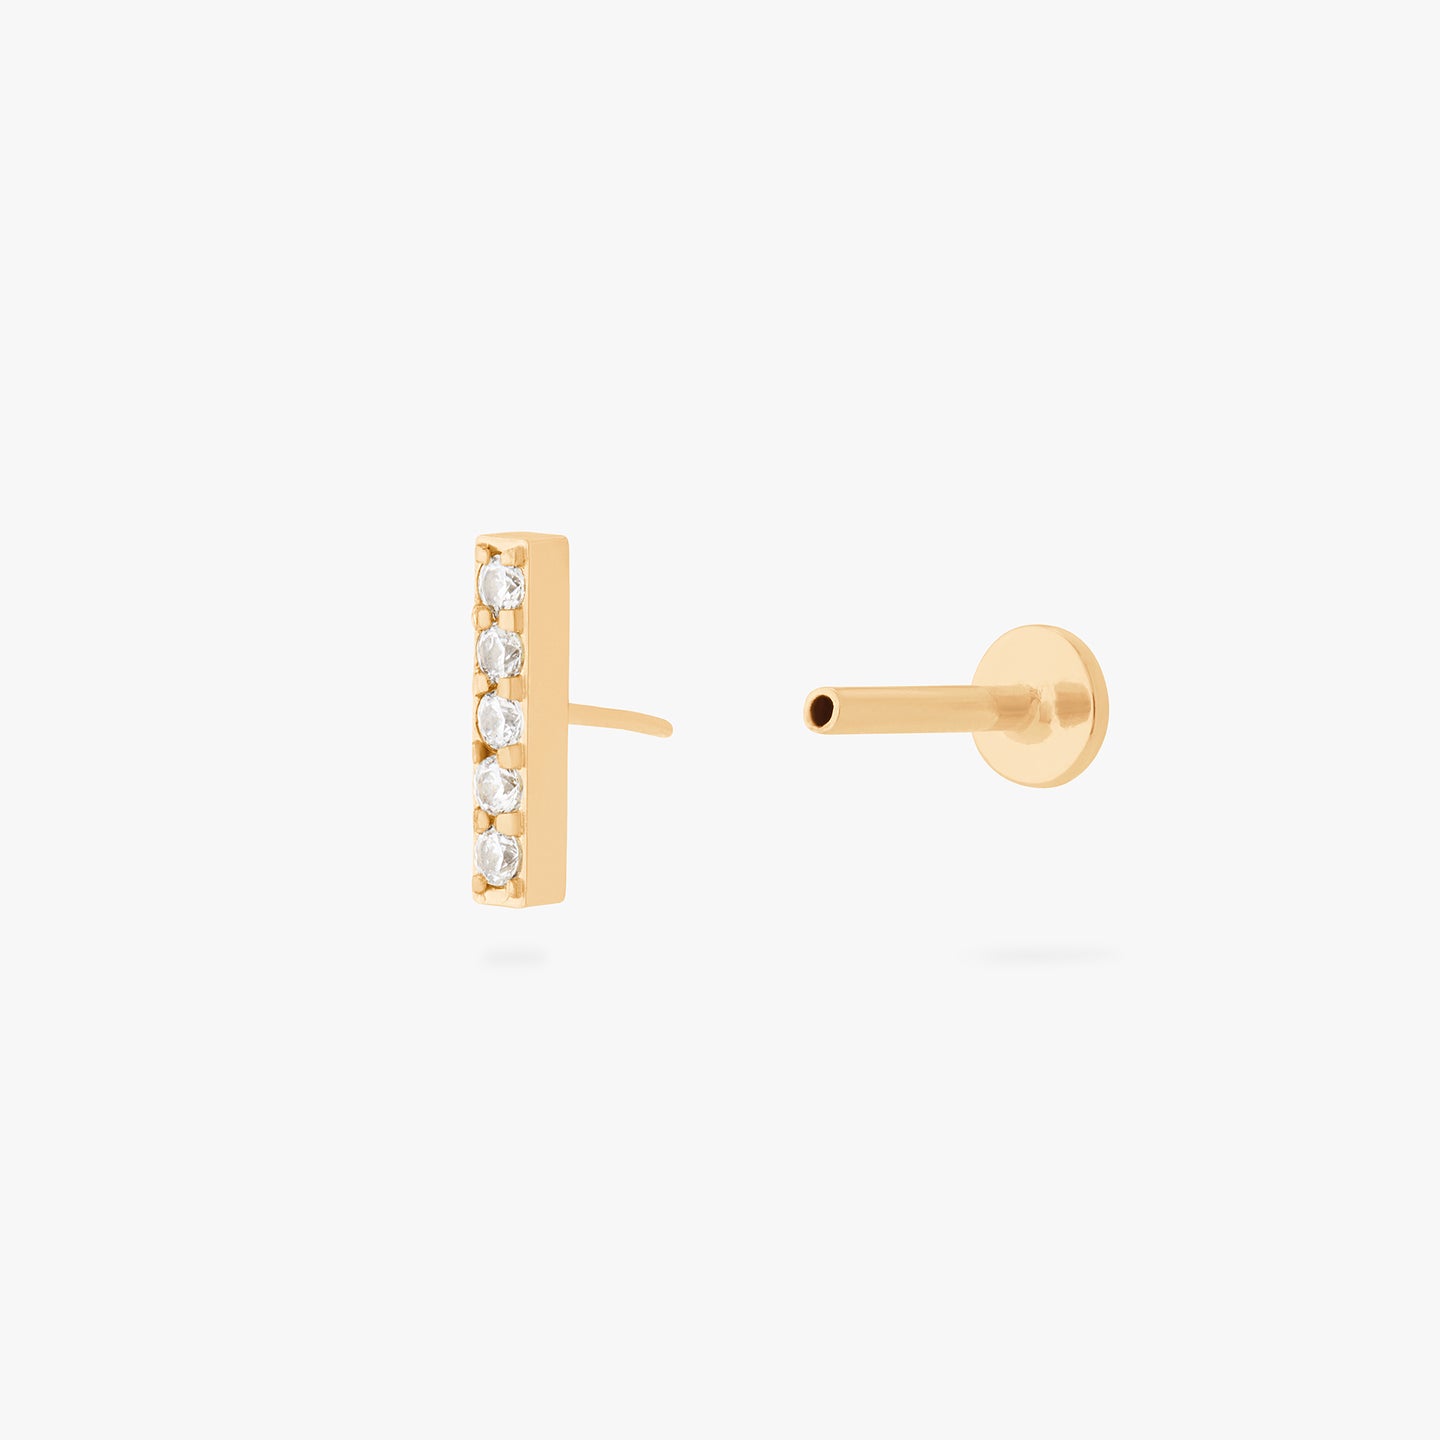 This is an image of a gold/clear bar that has 5 mini CZs in a line formation with a gold labret with a circle disc and the 